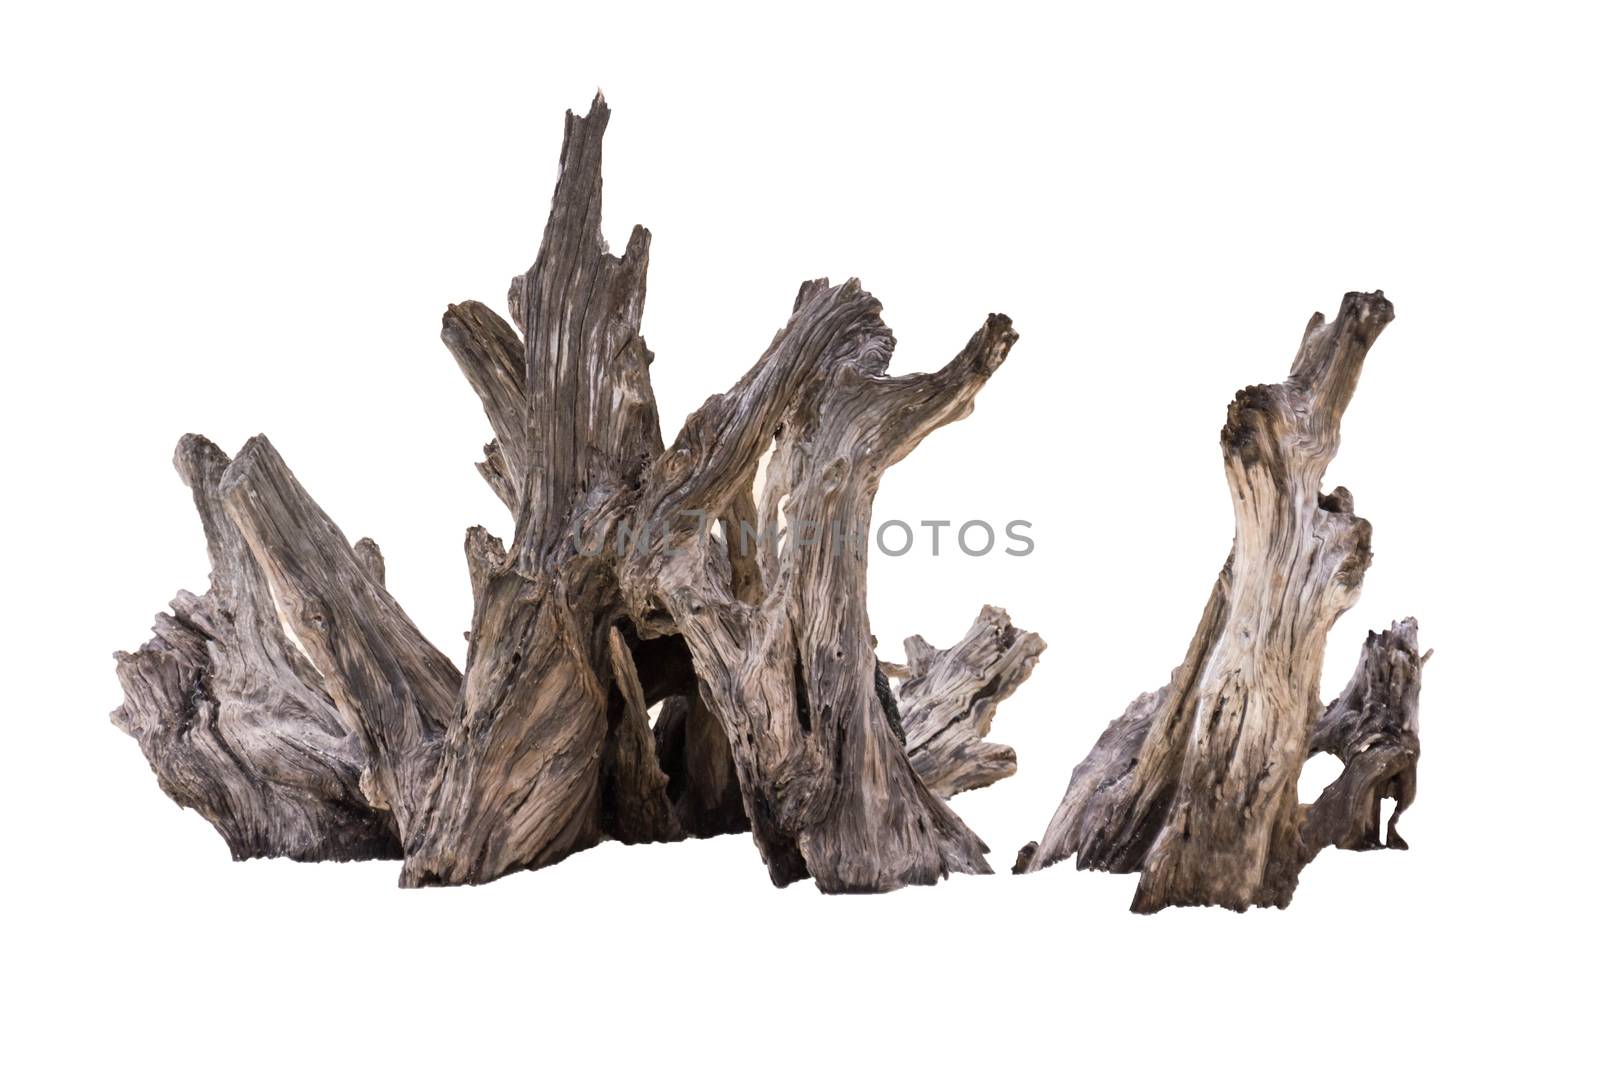 Rotten Dead Tree Trunk, Old Wooden Decay Isolated On White Backg by rakoptonLPN